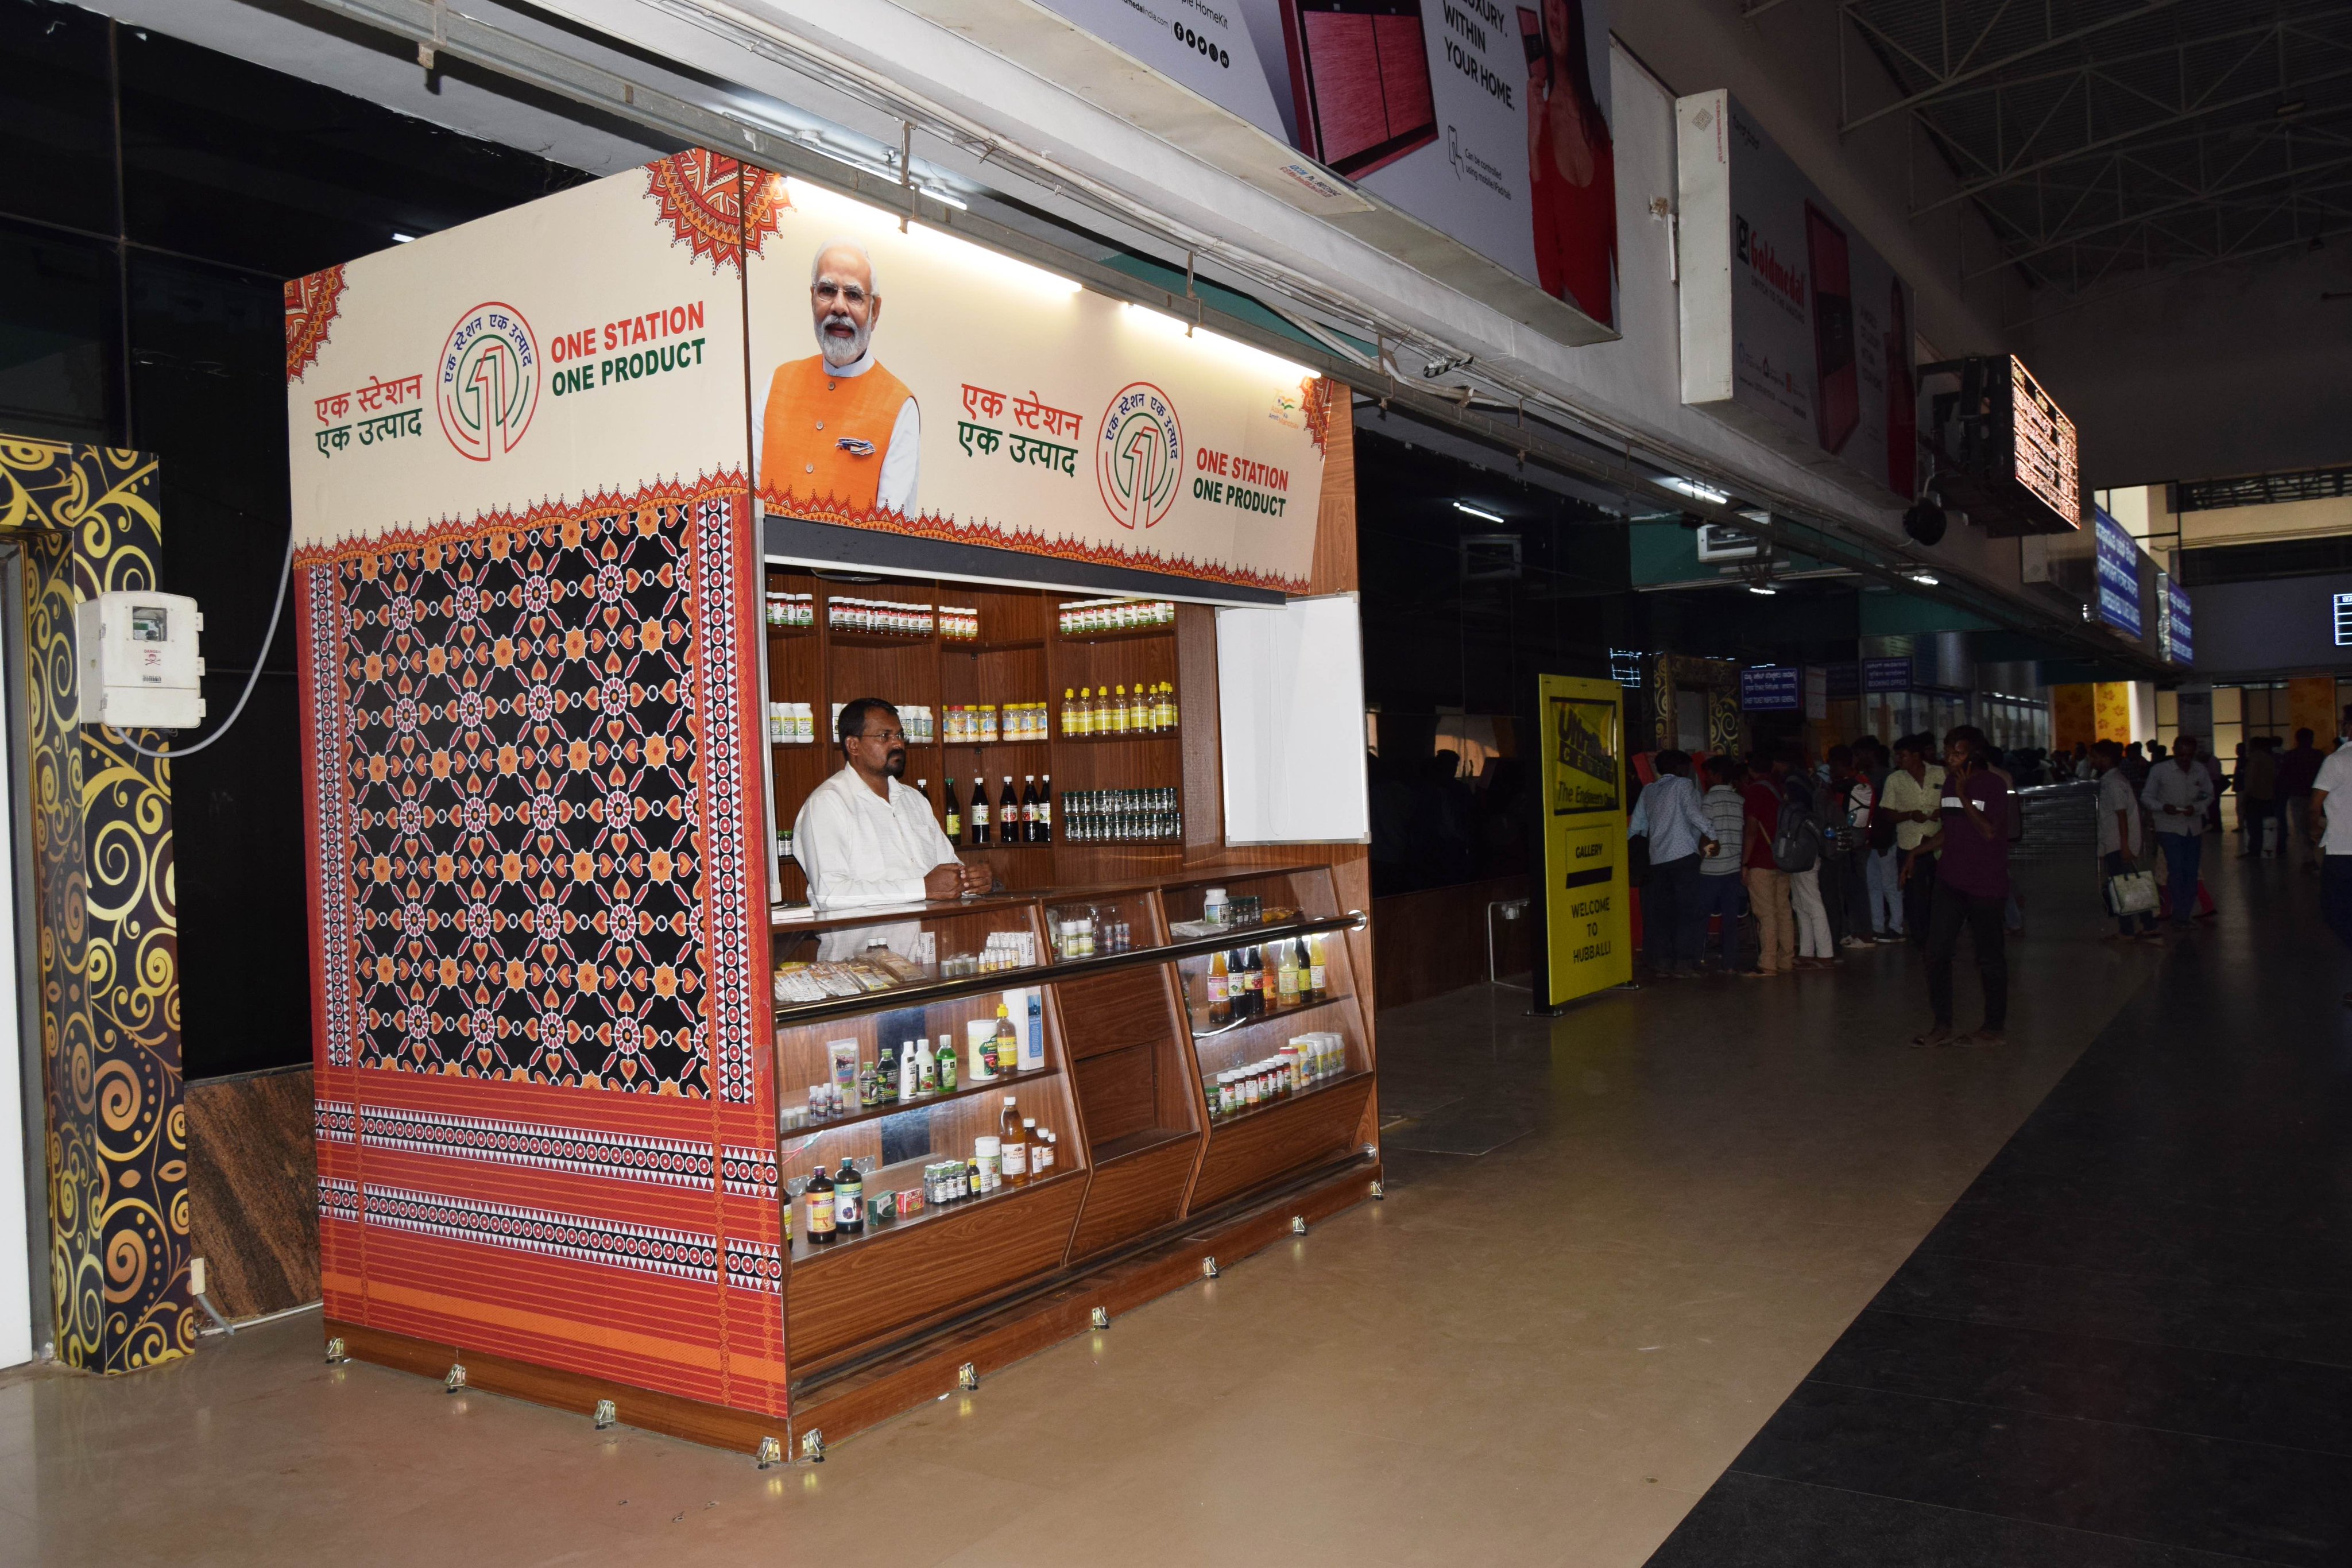 Ministry of Railways on X: "Aligned with Hon'ble PM's 'Vocal for Local'  vision, the 'One Station, One Product' scheme empowers local artisans and  traders by promoting indigenous products. Visit the OSOP outlet